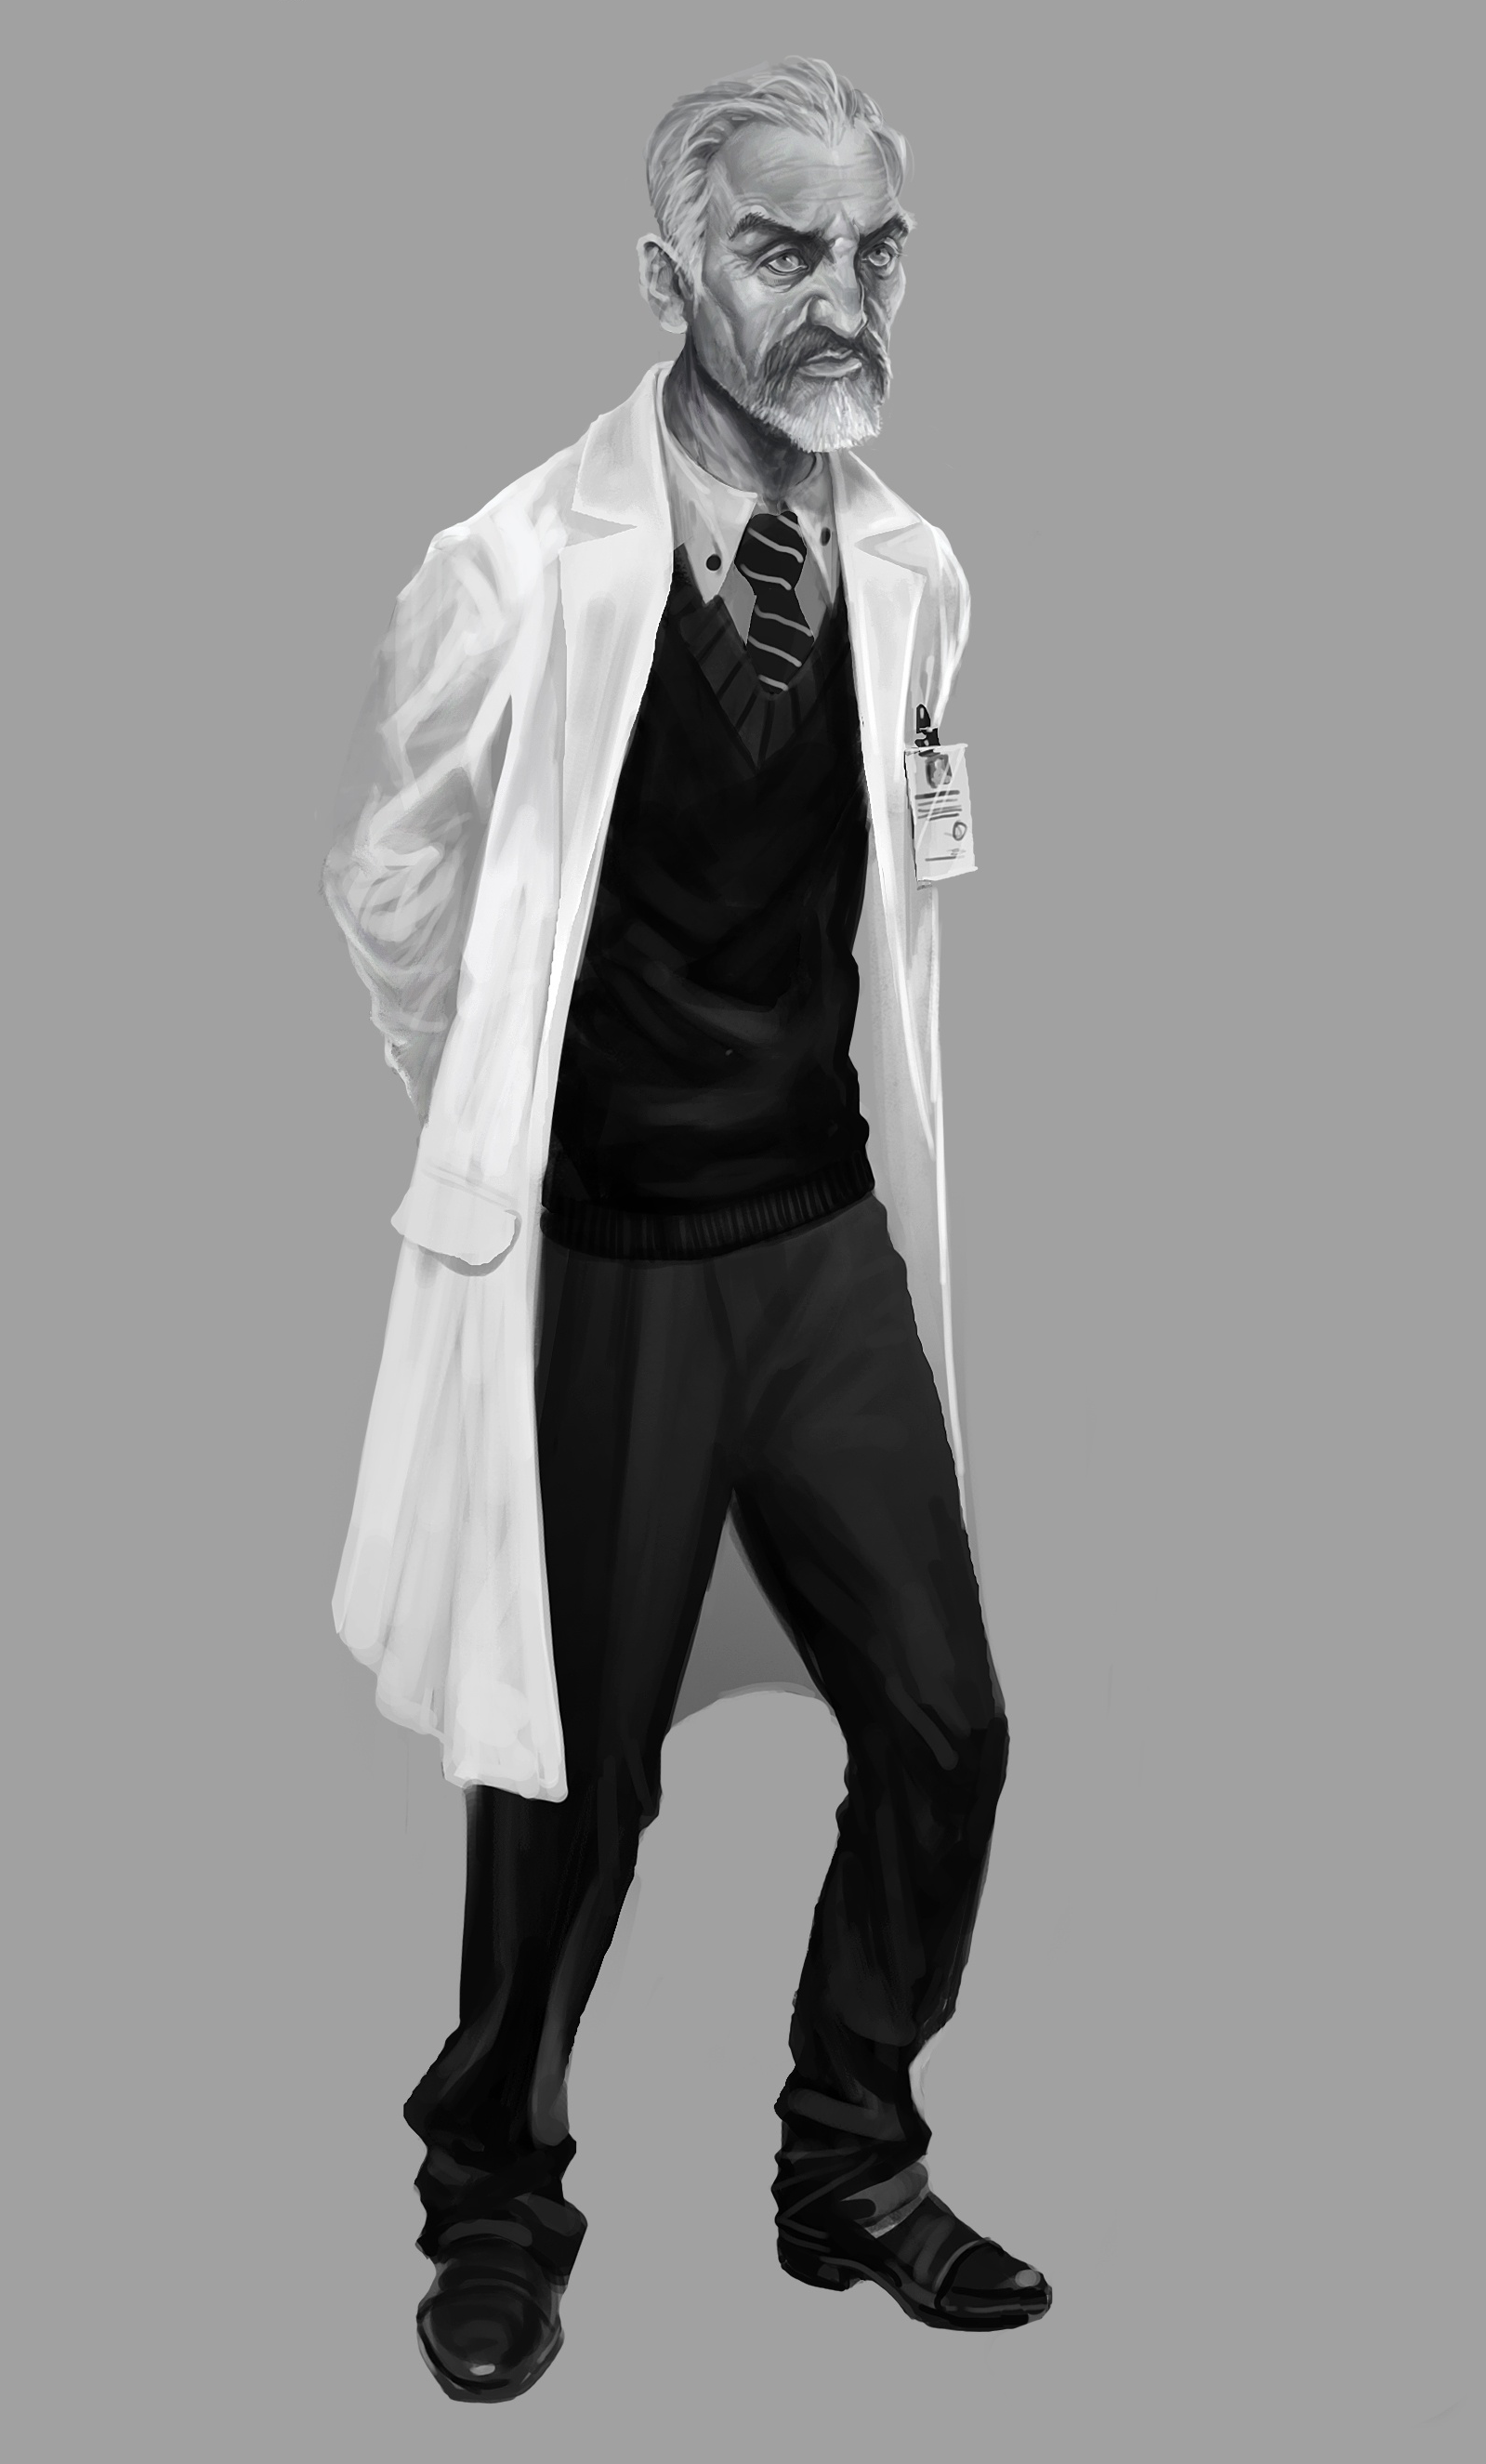 A man with a white coat